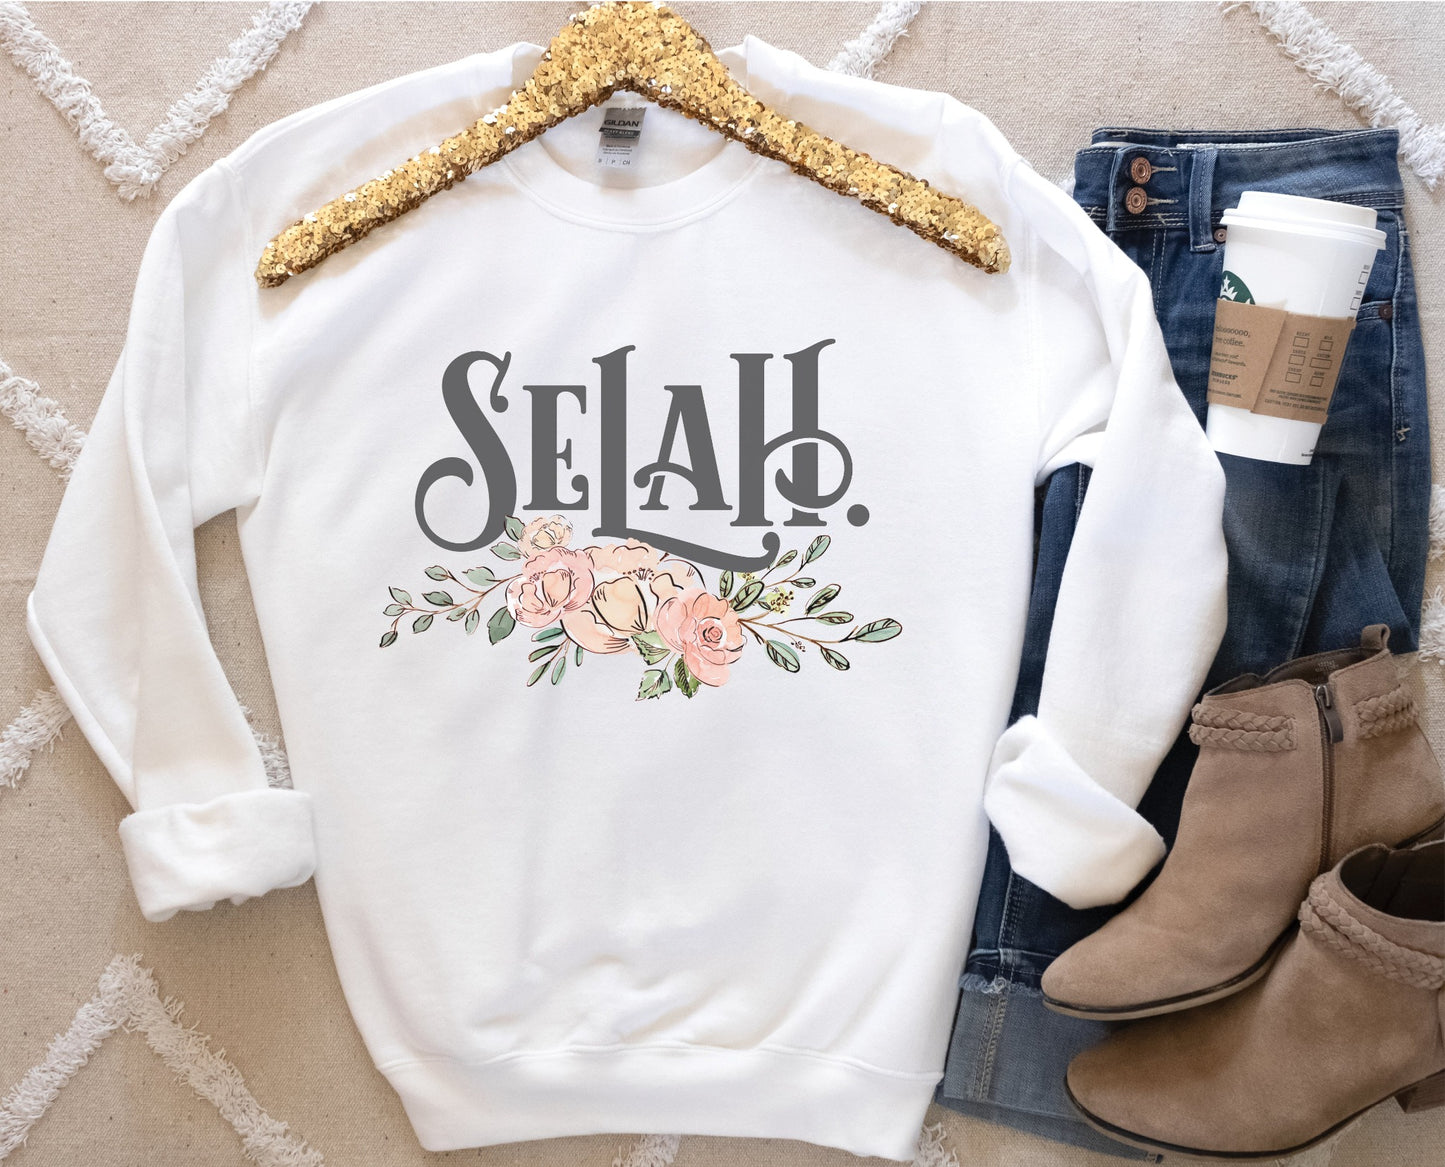 Selah Psalm watercolor floral Christian aesthetic design printed in charcoal gray, peach, blush pink, on cozy white unisex crewneck sweatshirt for women